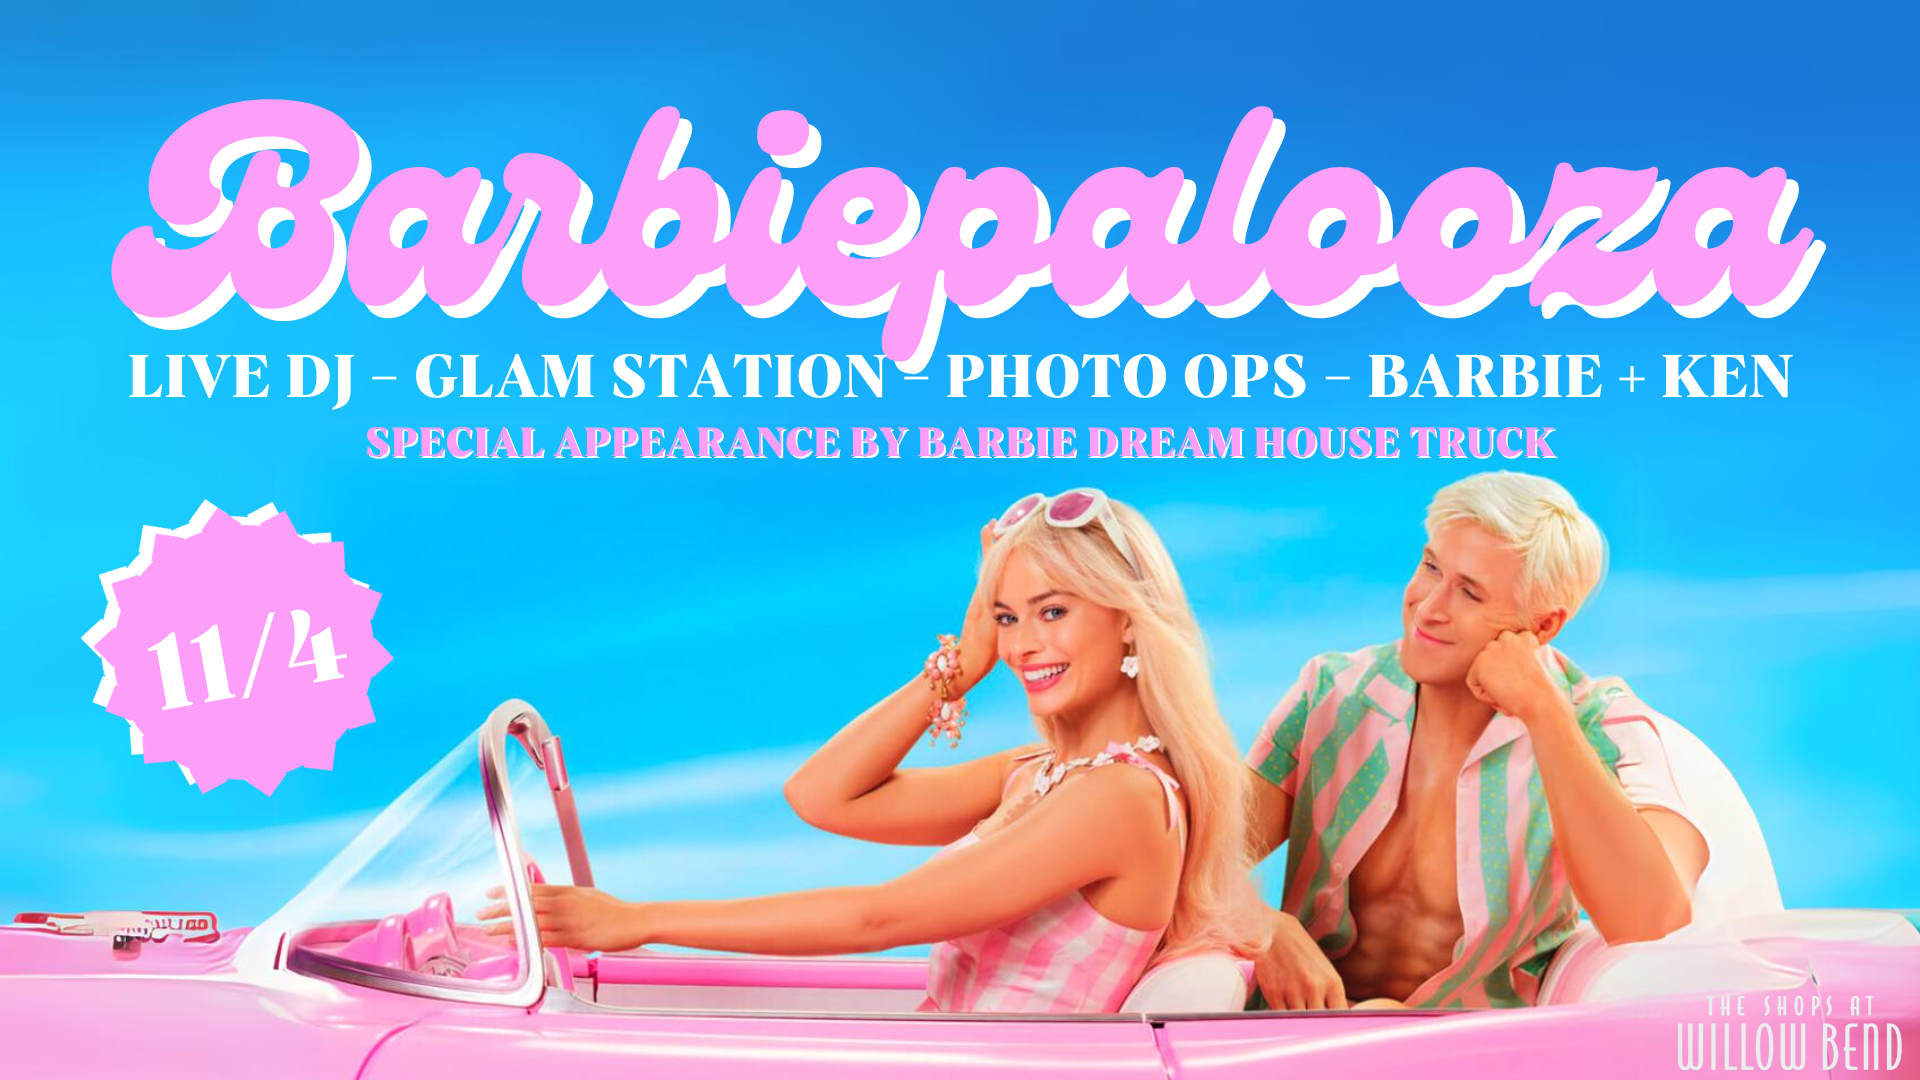 Barbiepalooza at The Shops at Willow Bend.